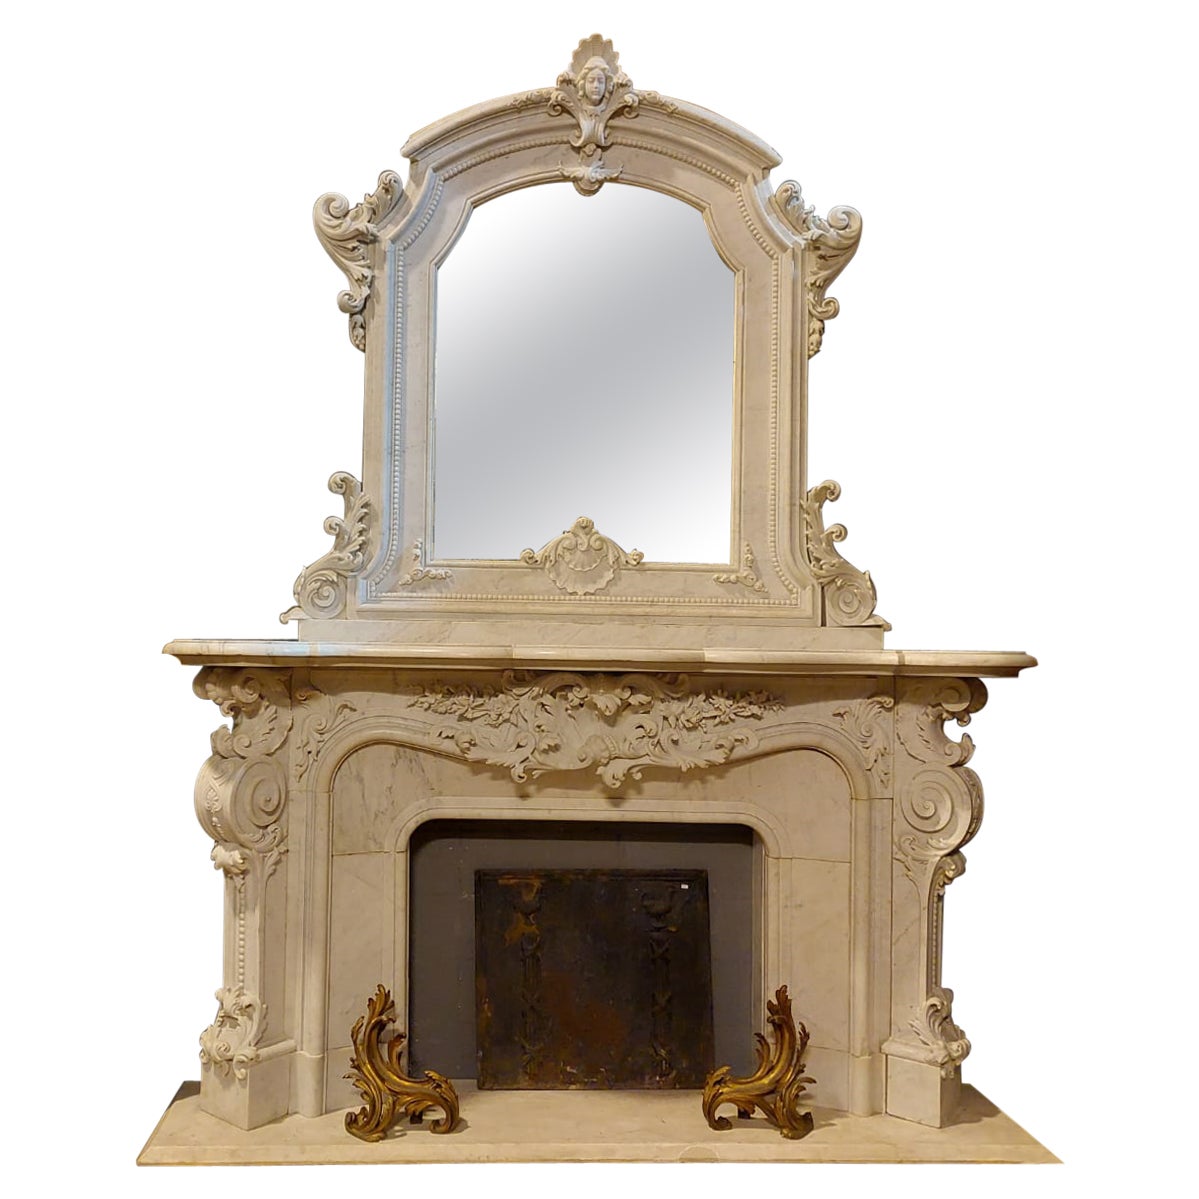 Antique Fireplace White Statuary Marble, Very Rich Sculpture, Complete, 1860